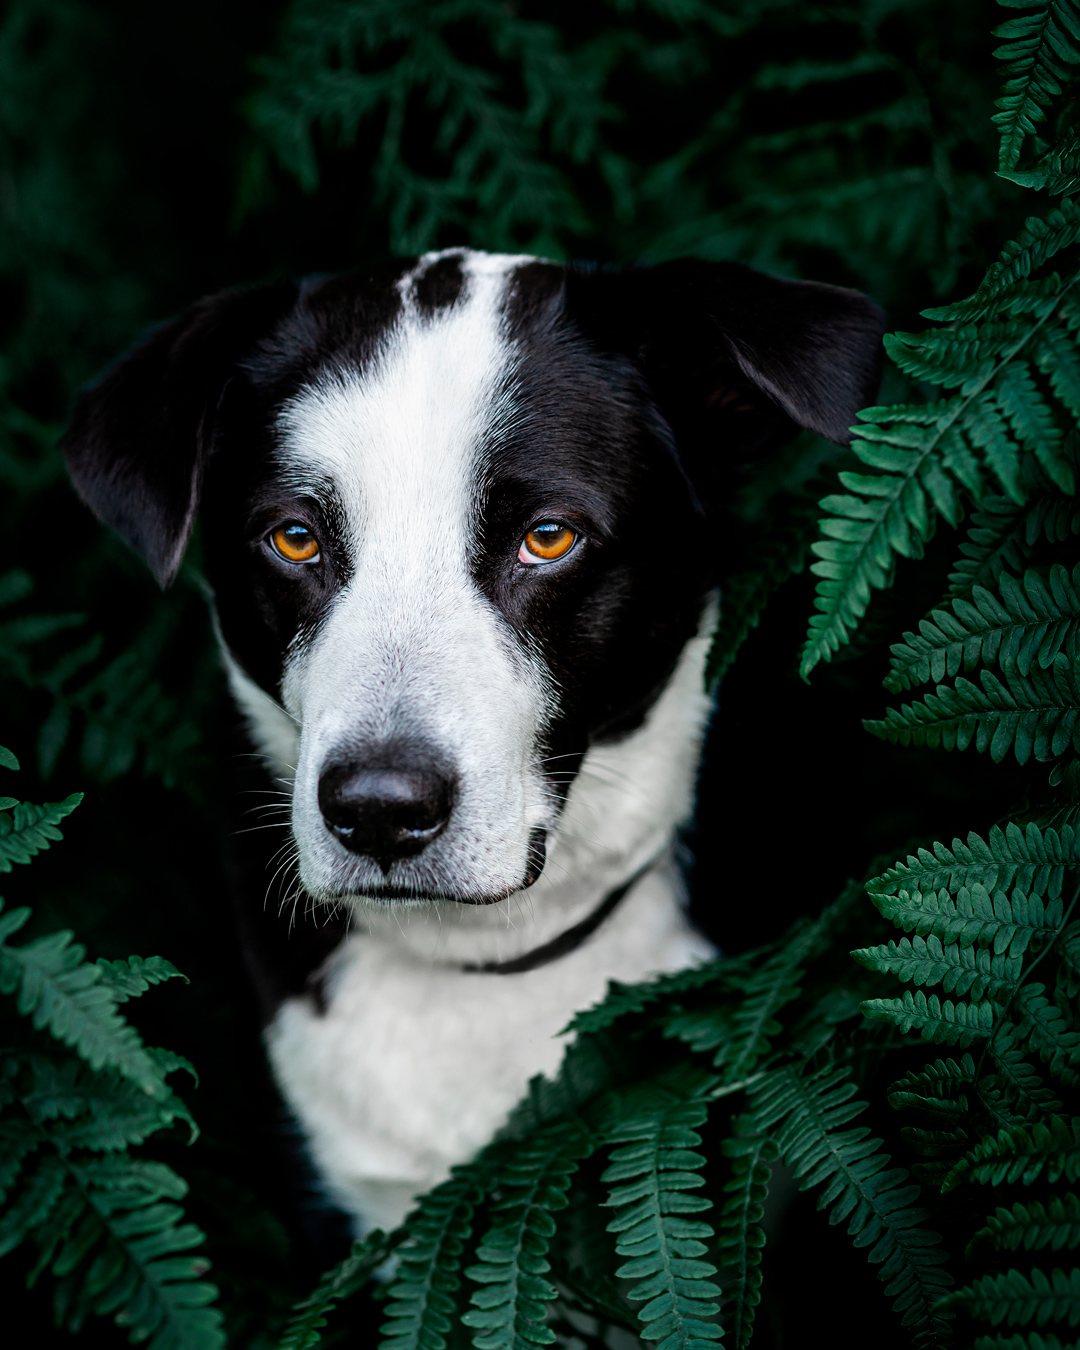 Outdoor moody pet portrait of black and white dog in forest fern foliage